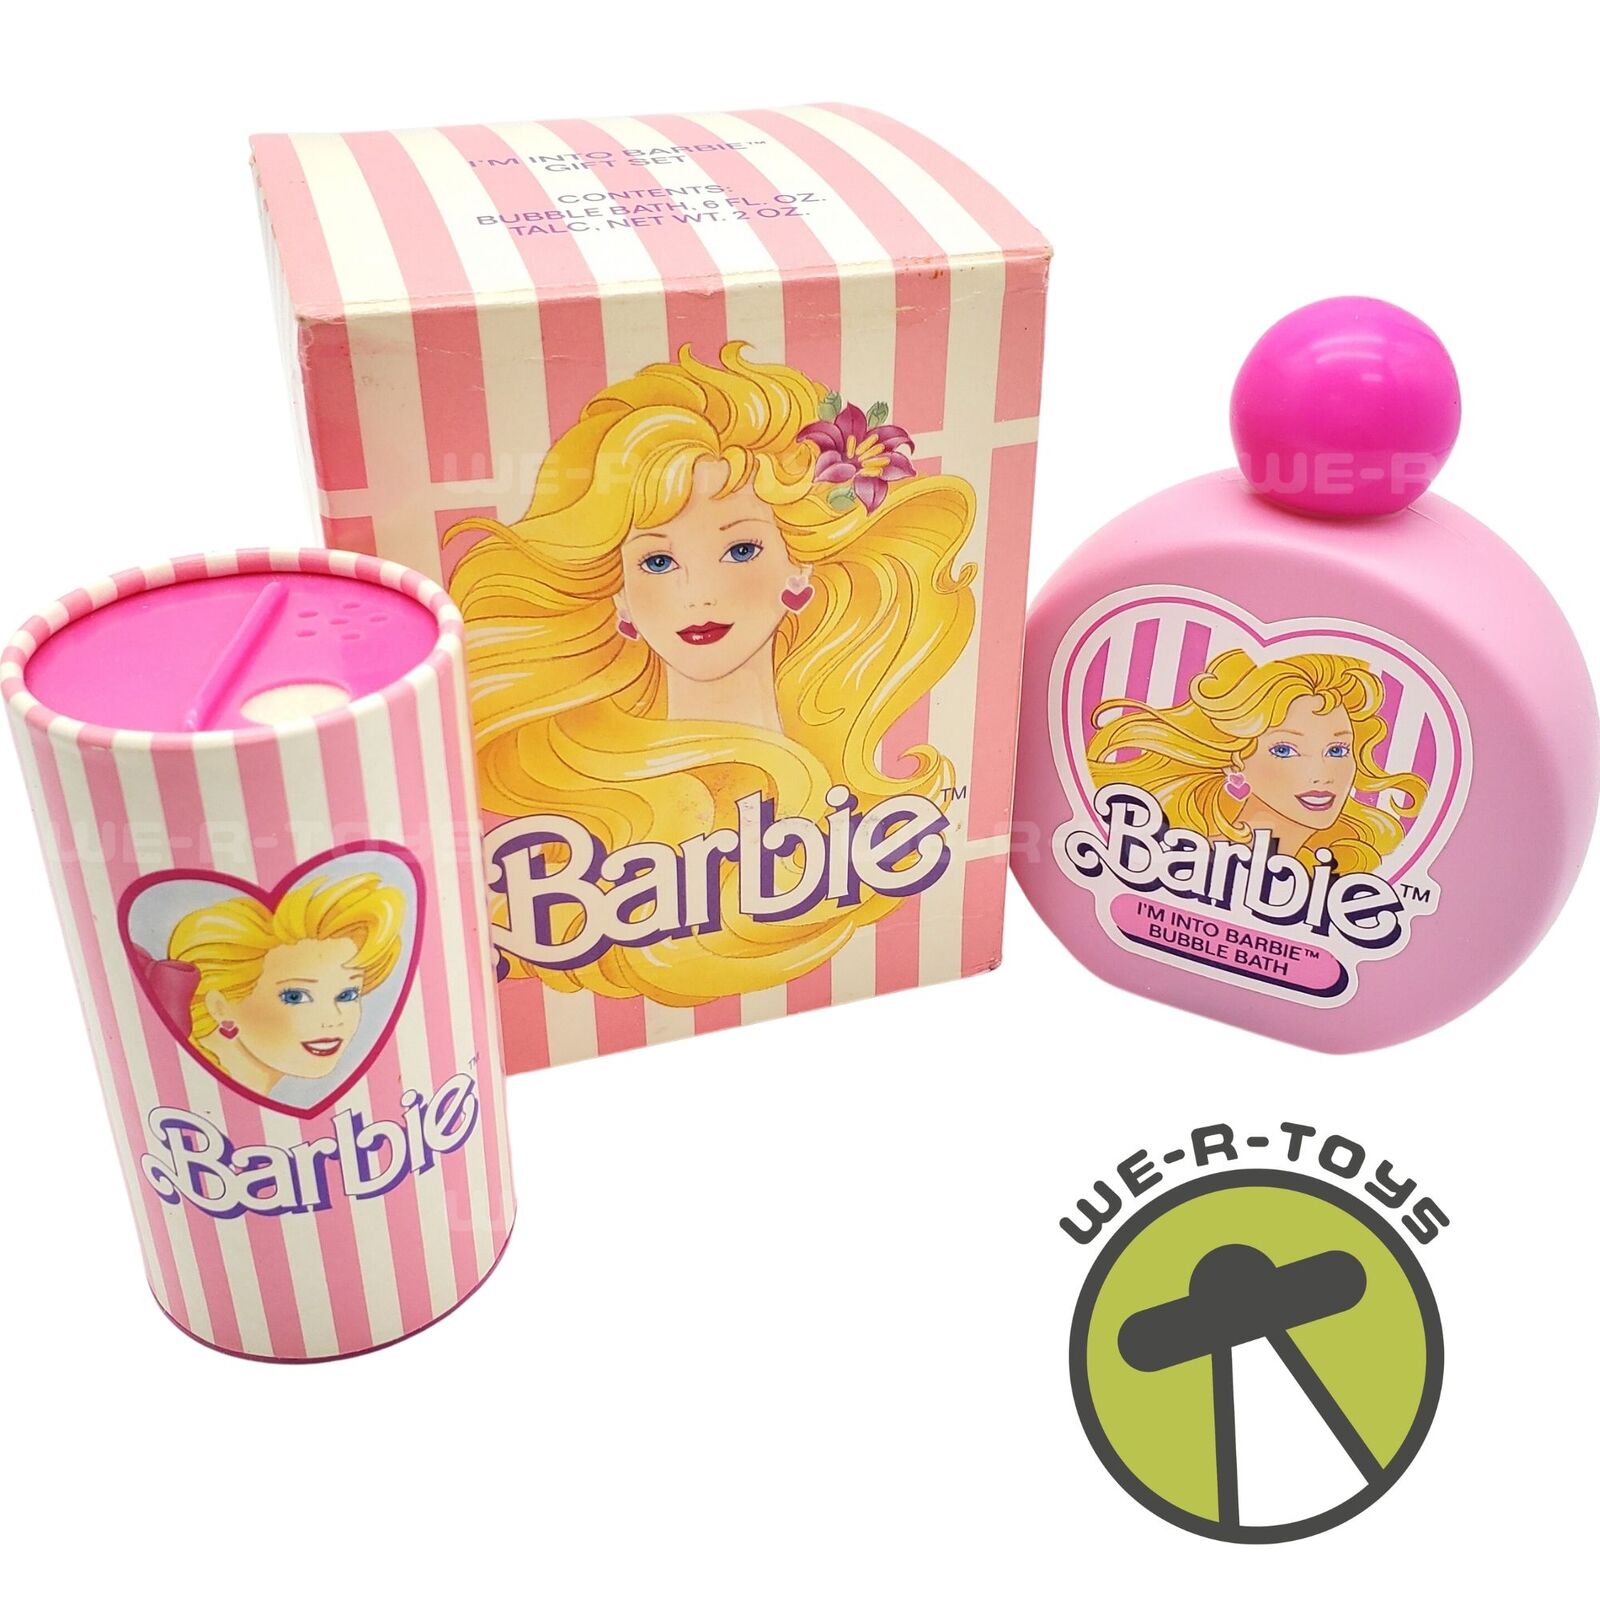 I\'m Into Barbie Special Set of Bubble Bath and Talc Avon Mattel 1989 NEW